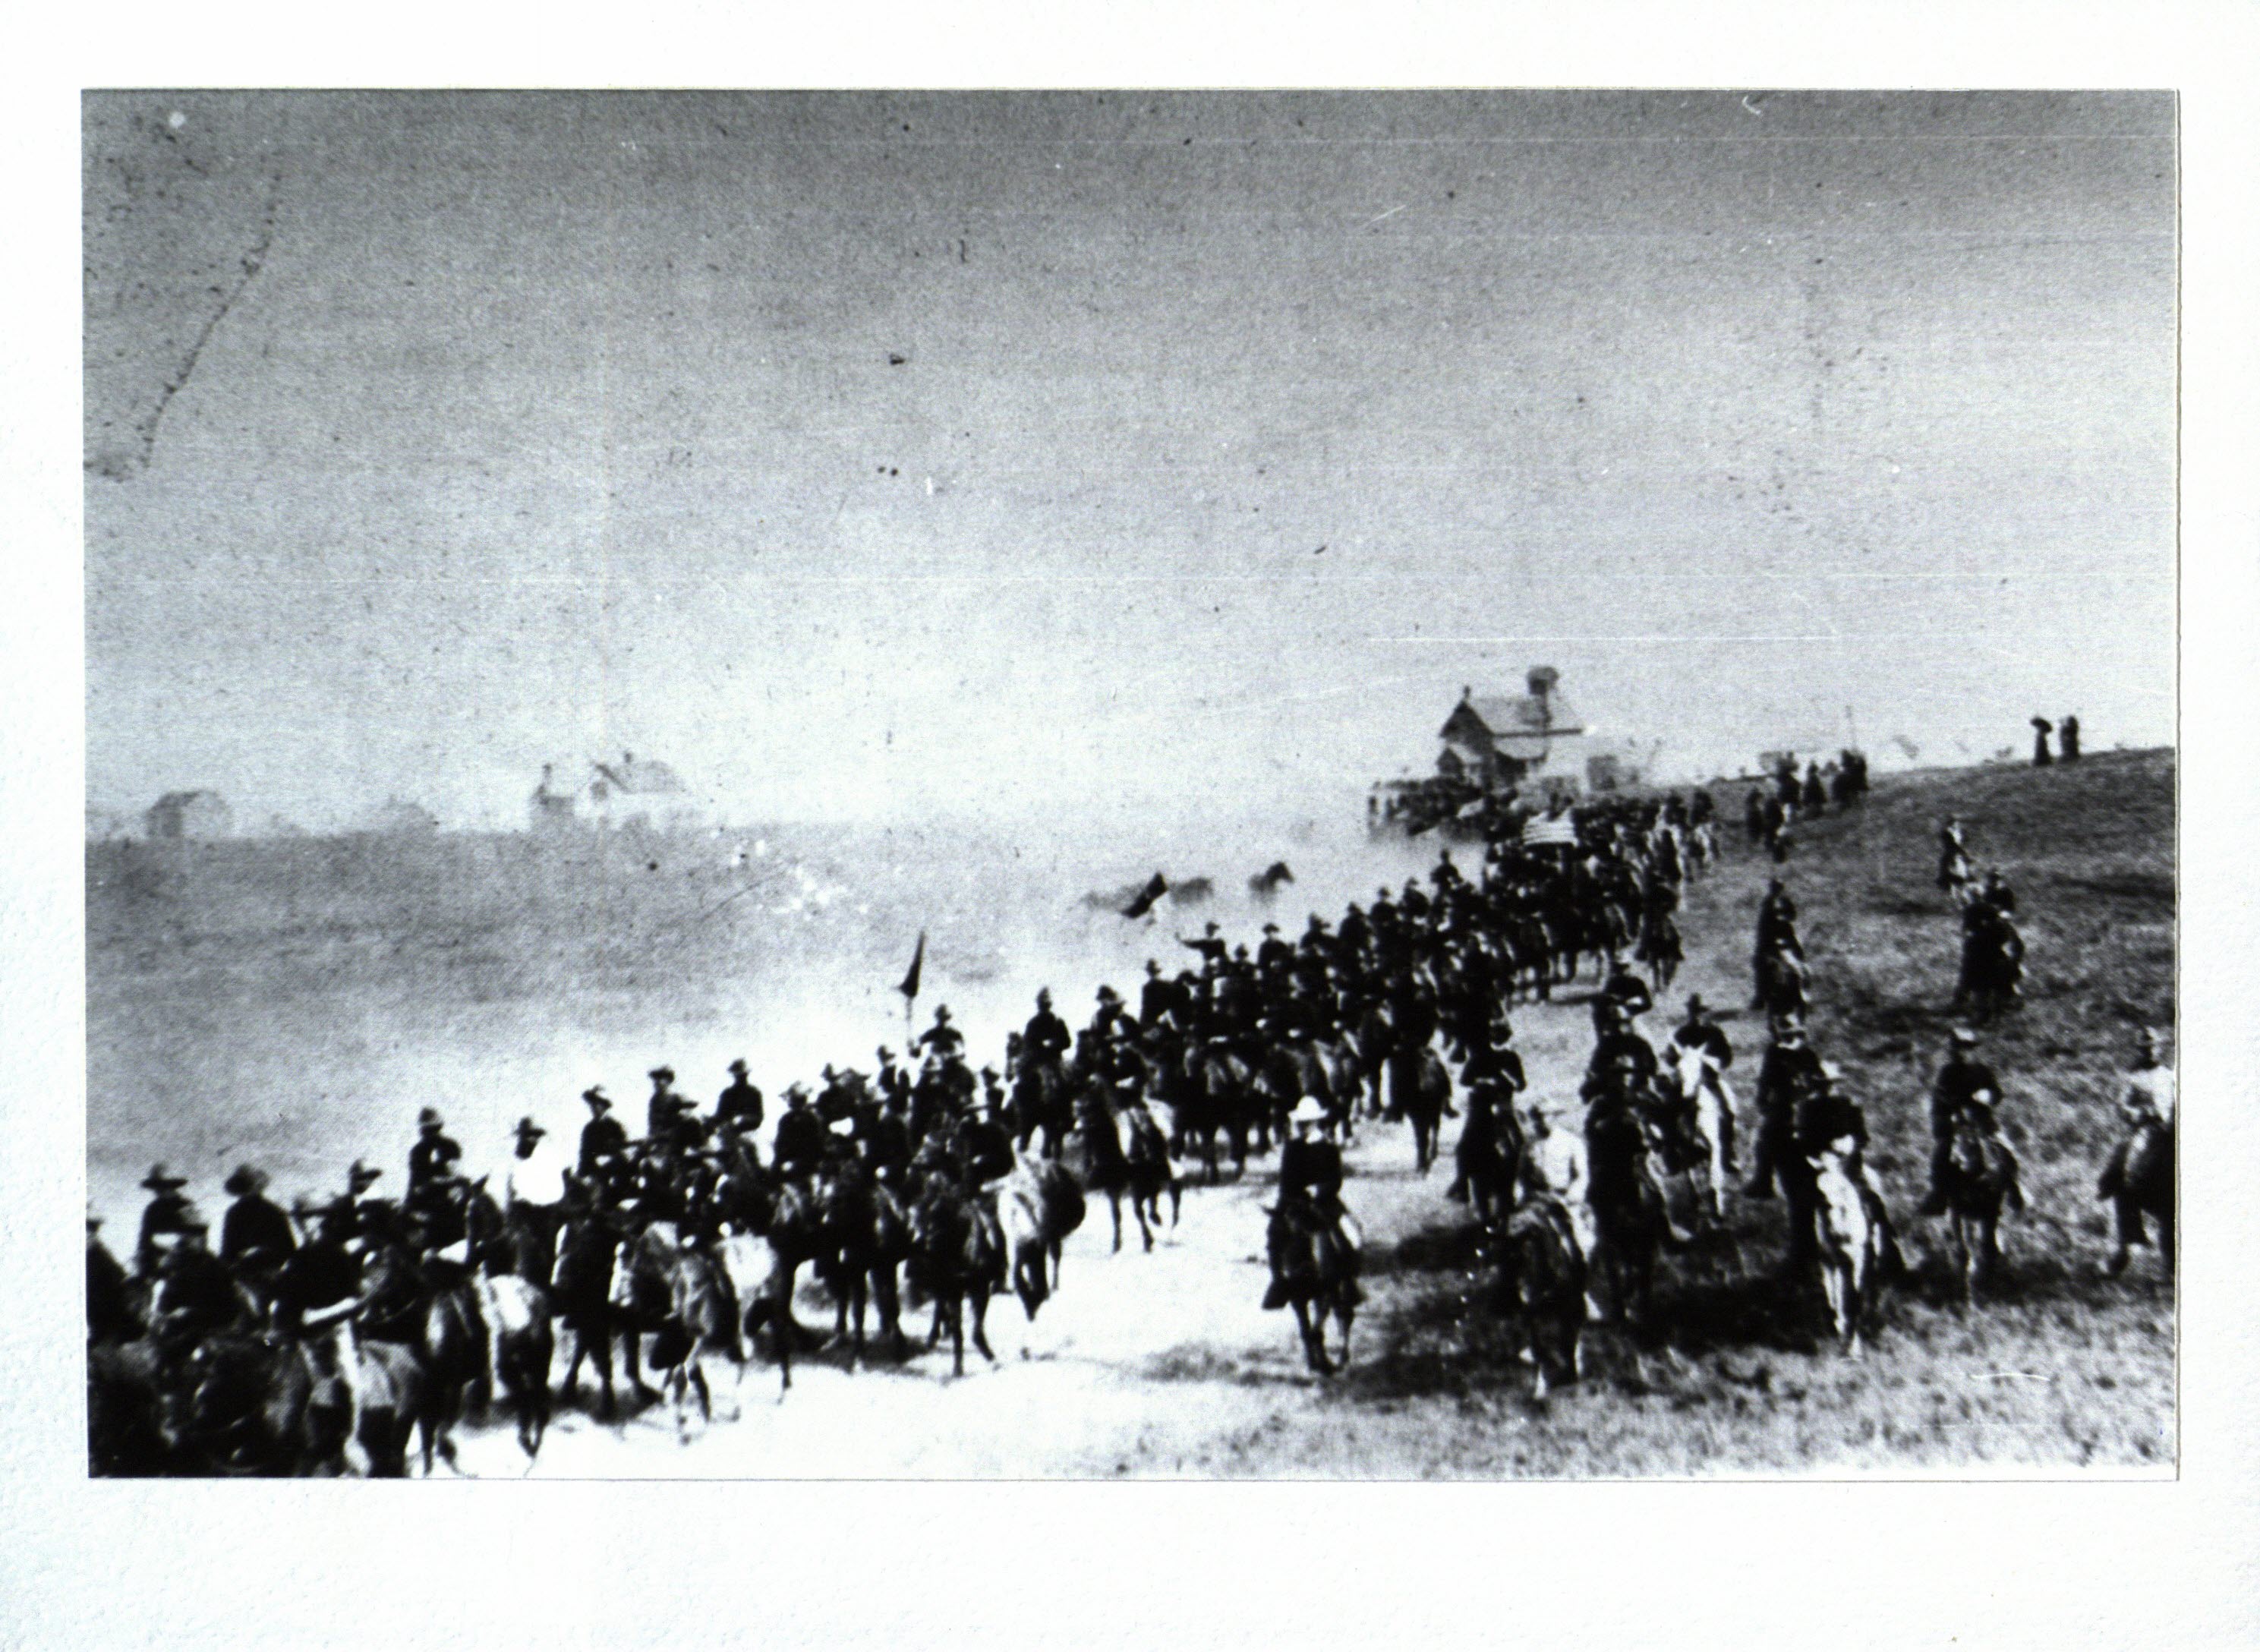 Rough riders on horse back